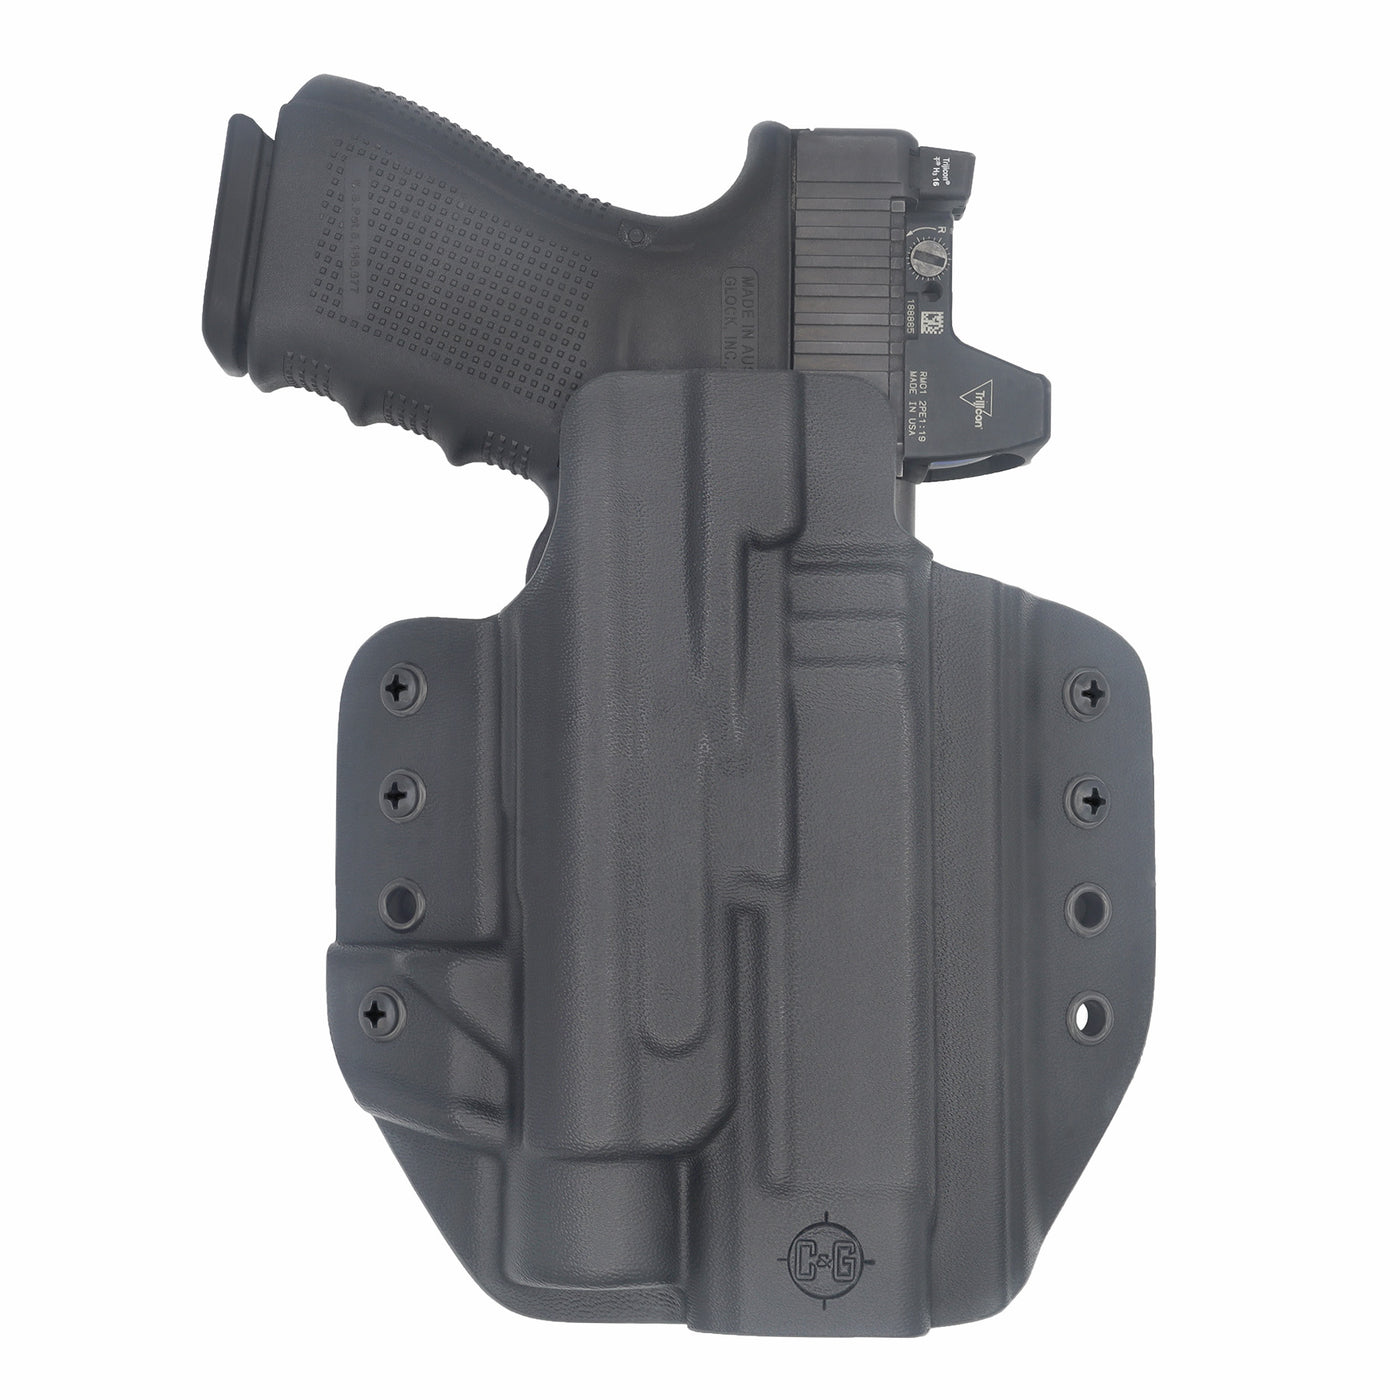 C&G Holsters Quickship OWB Tactical Poly80 Streamlight TLR1 in holstered position